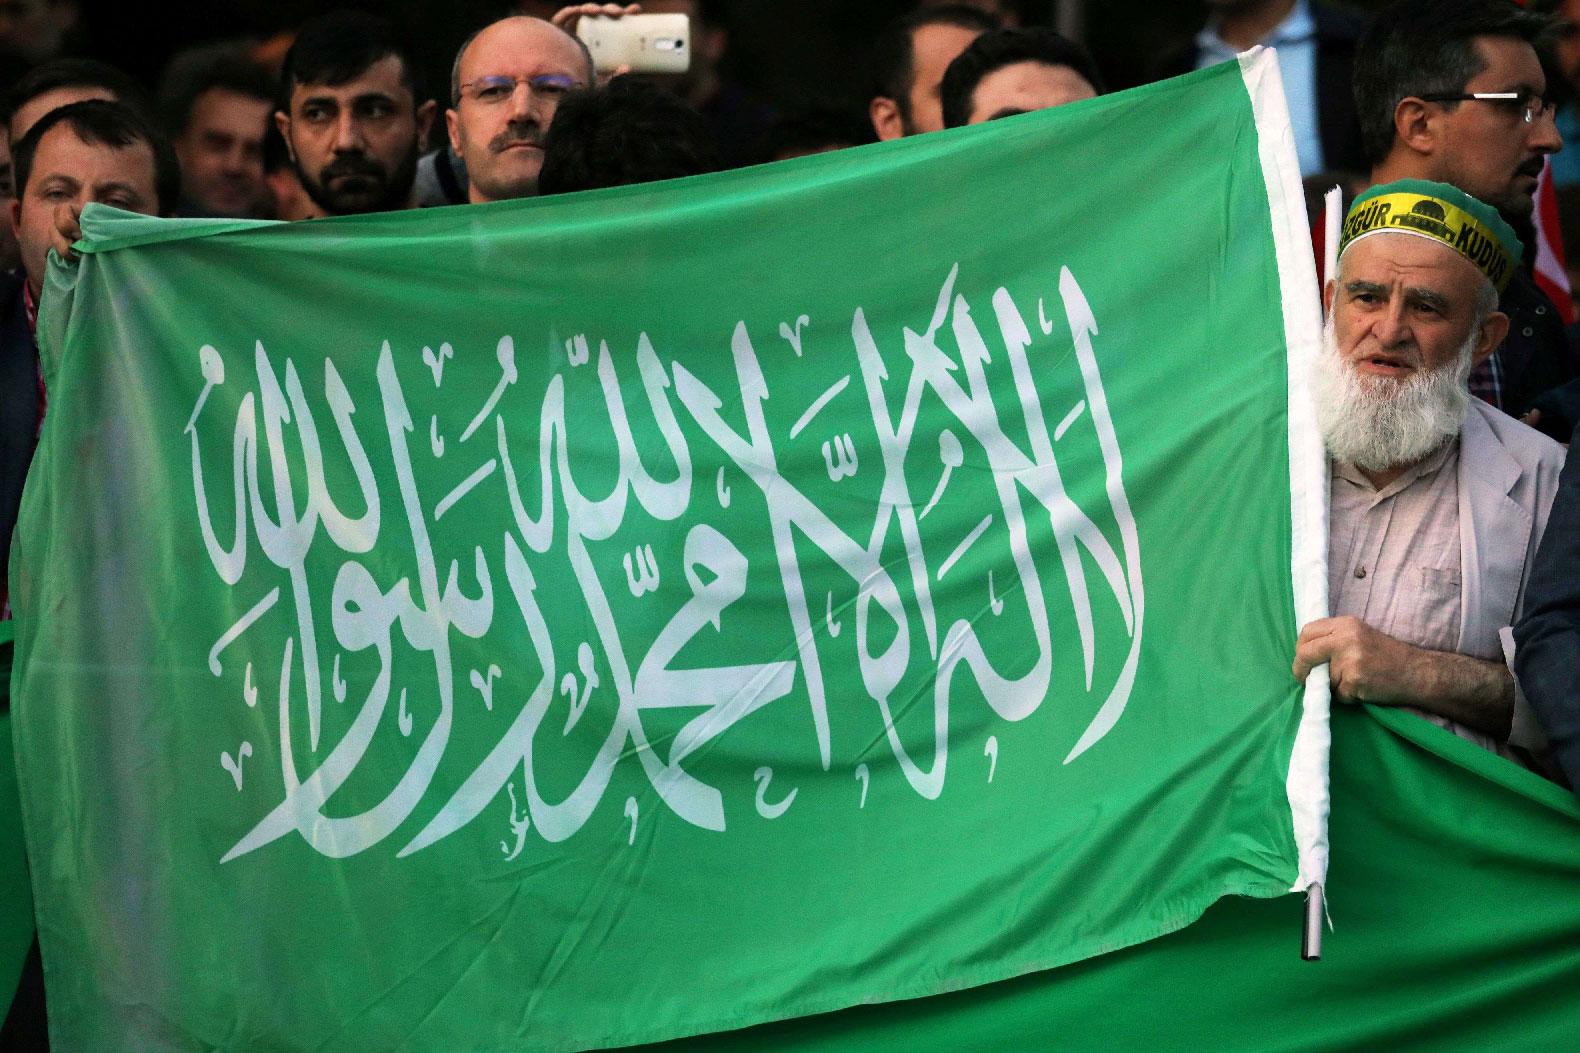 A protester chants slogans as he holds a Hamas flag outside the residence of the Israeli Ambassador in Ankara on May 14, 2018 during a demonstration against US President Donald Trump's decision to move the US embassy from Tel Aviv to Jerusalem.